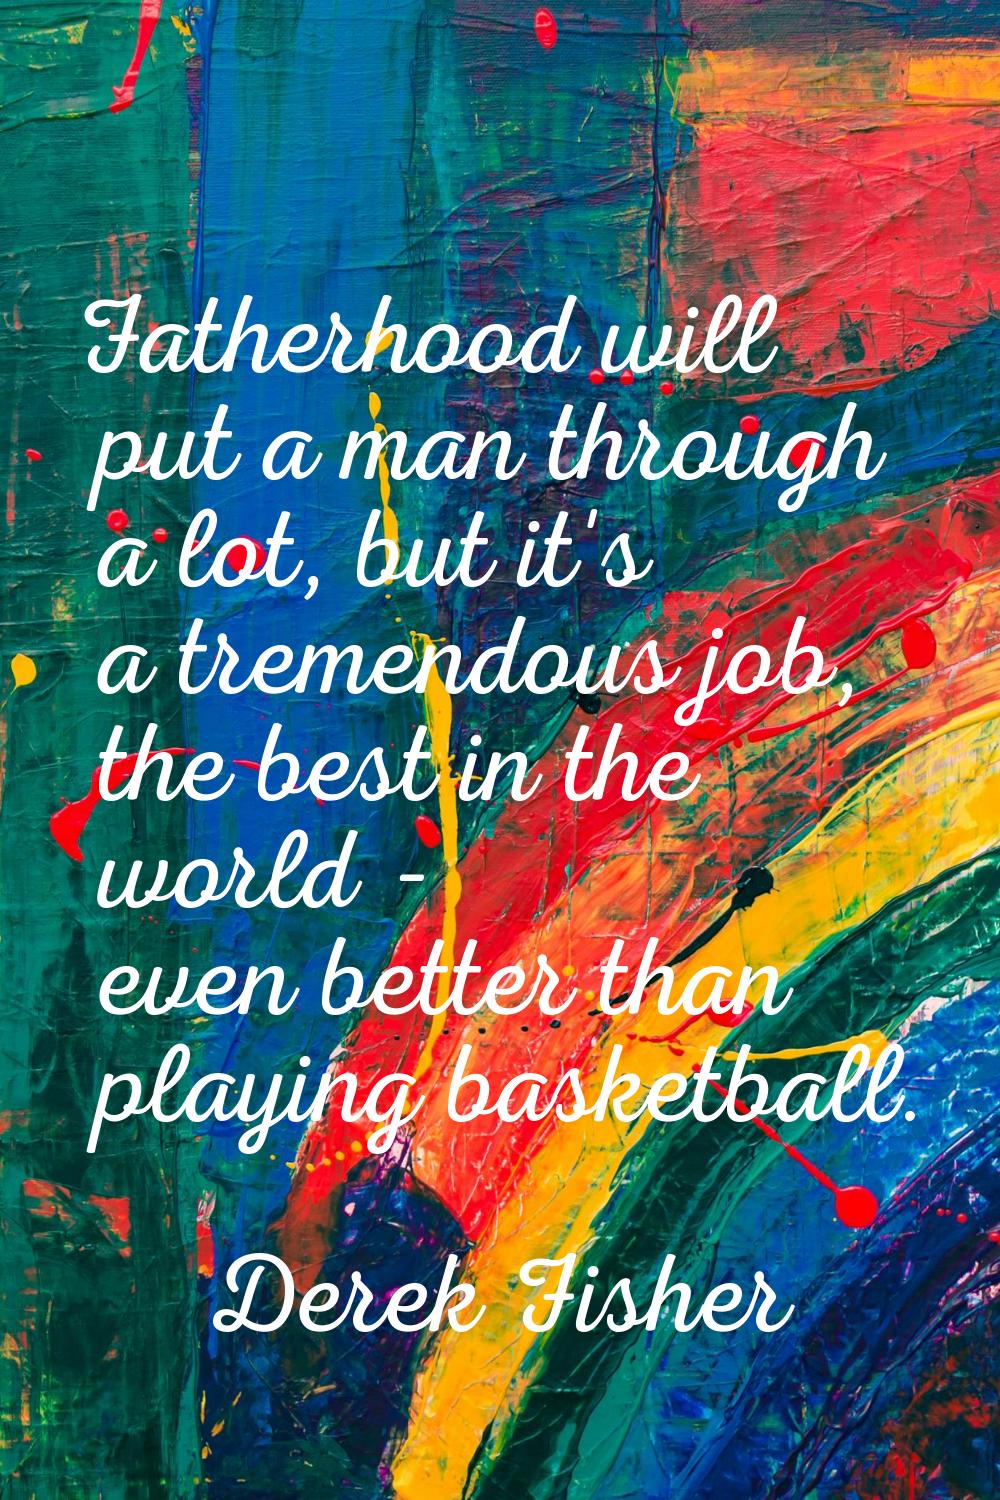 Fatherhood will put a man through a lot, but it's a tremendous job, the best in the world - even be